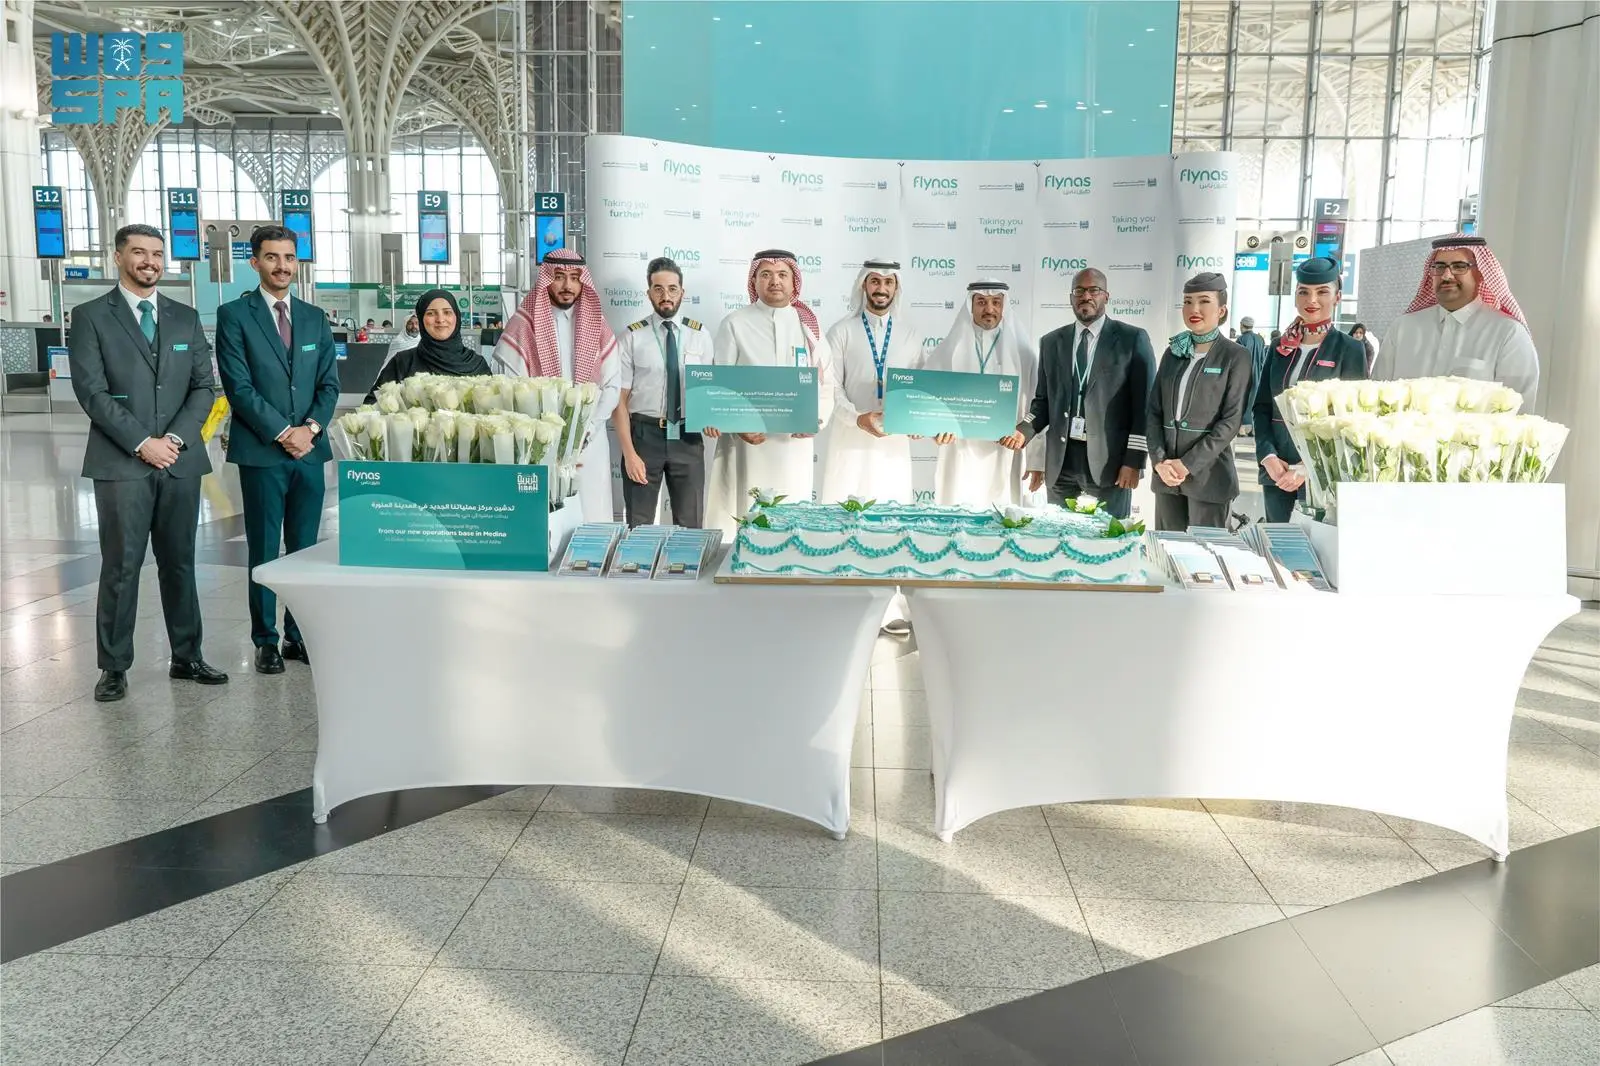 Flynas launched its newest operation base at Prince Mohammed bin Abdulaziz International Airport in Madinah. (SPA)